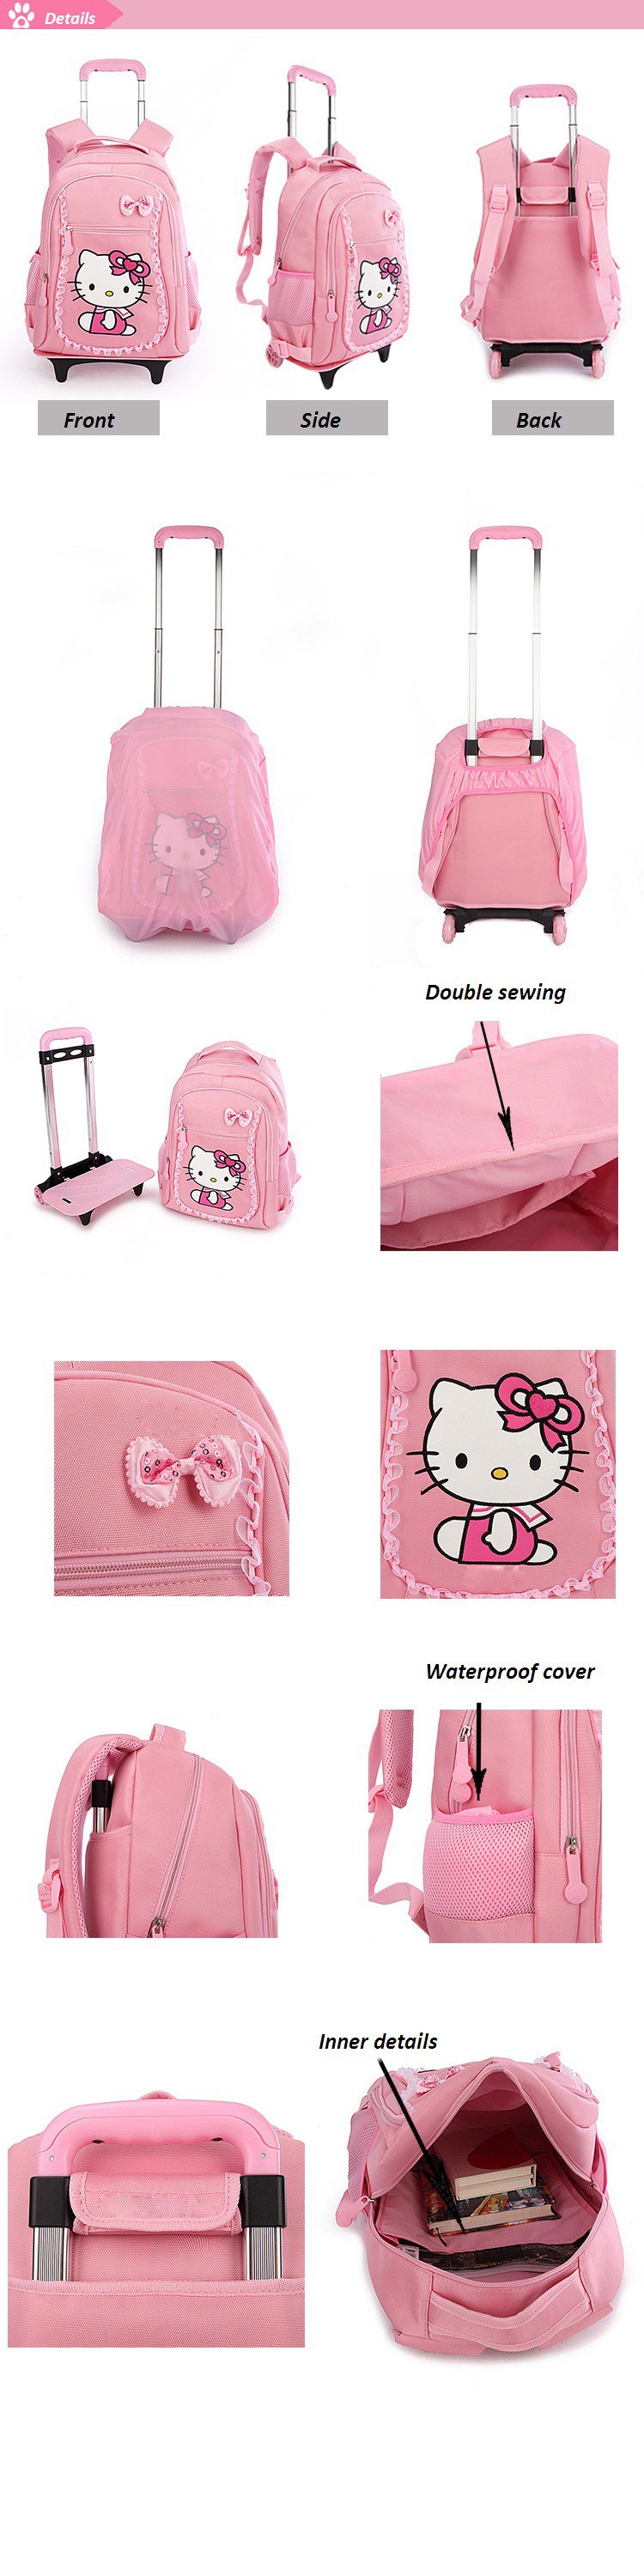 Free-Shipping-Hello-Kitty-Children-School-Bags-Mochilas-Kid-Backpacks-With-Wheel-Trolley-Luggage-For-Girls-05